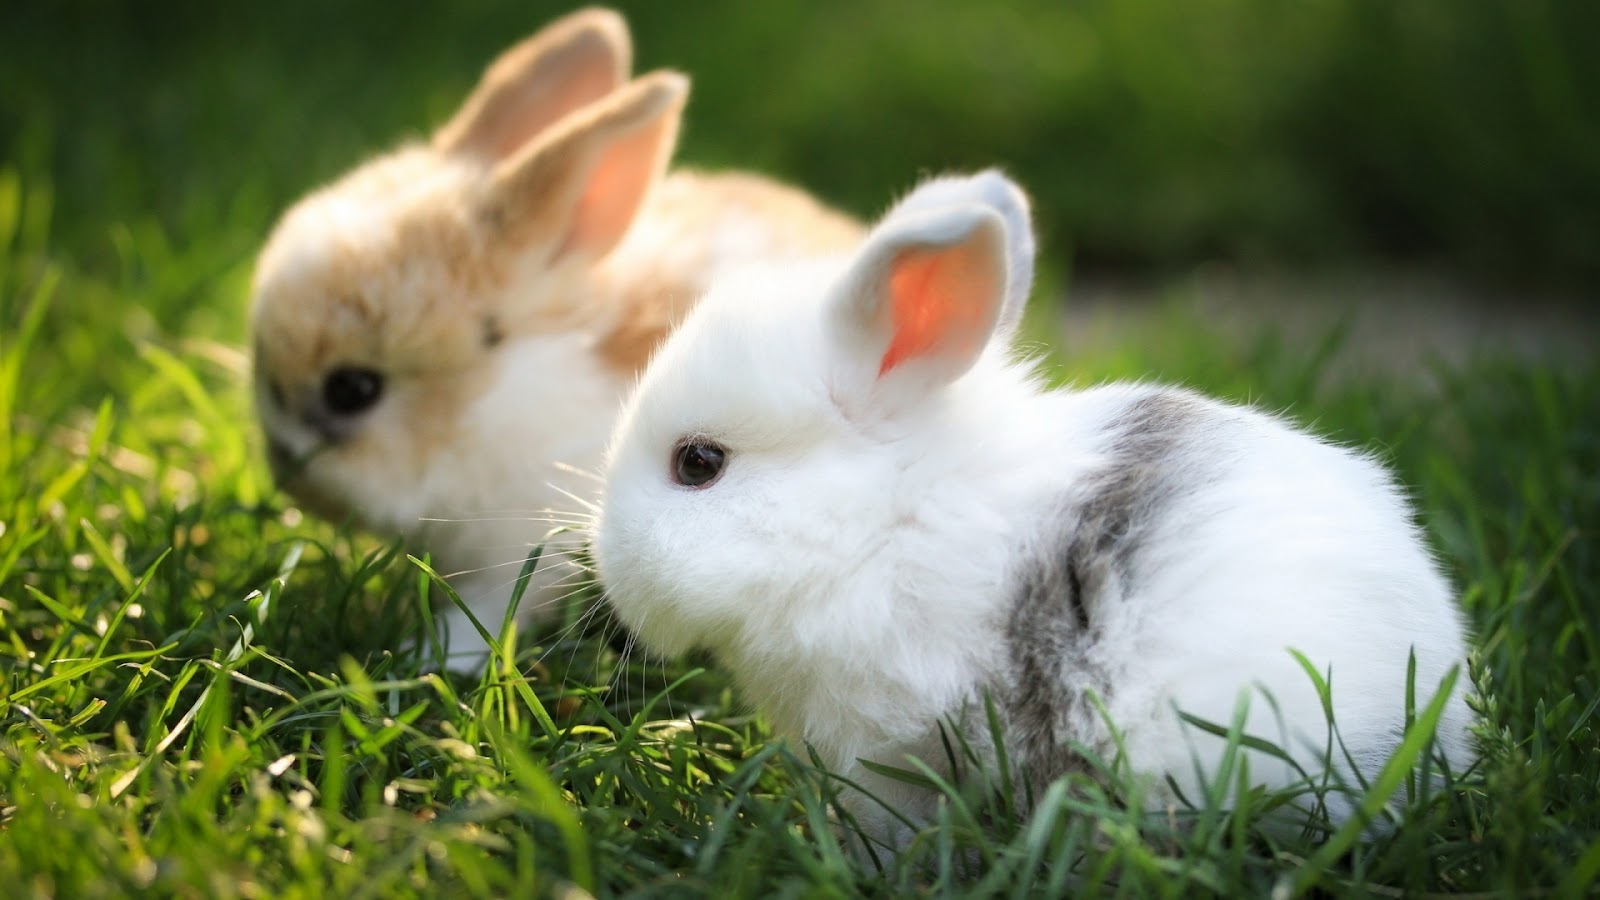 Rabbits Image Bunnies HD Wallpaper And Background Photos